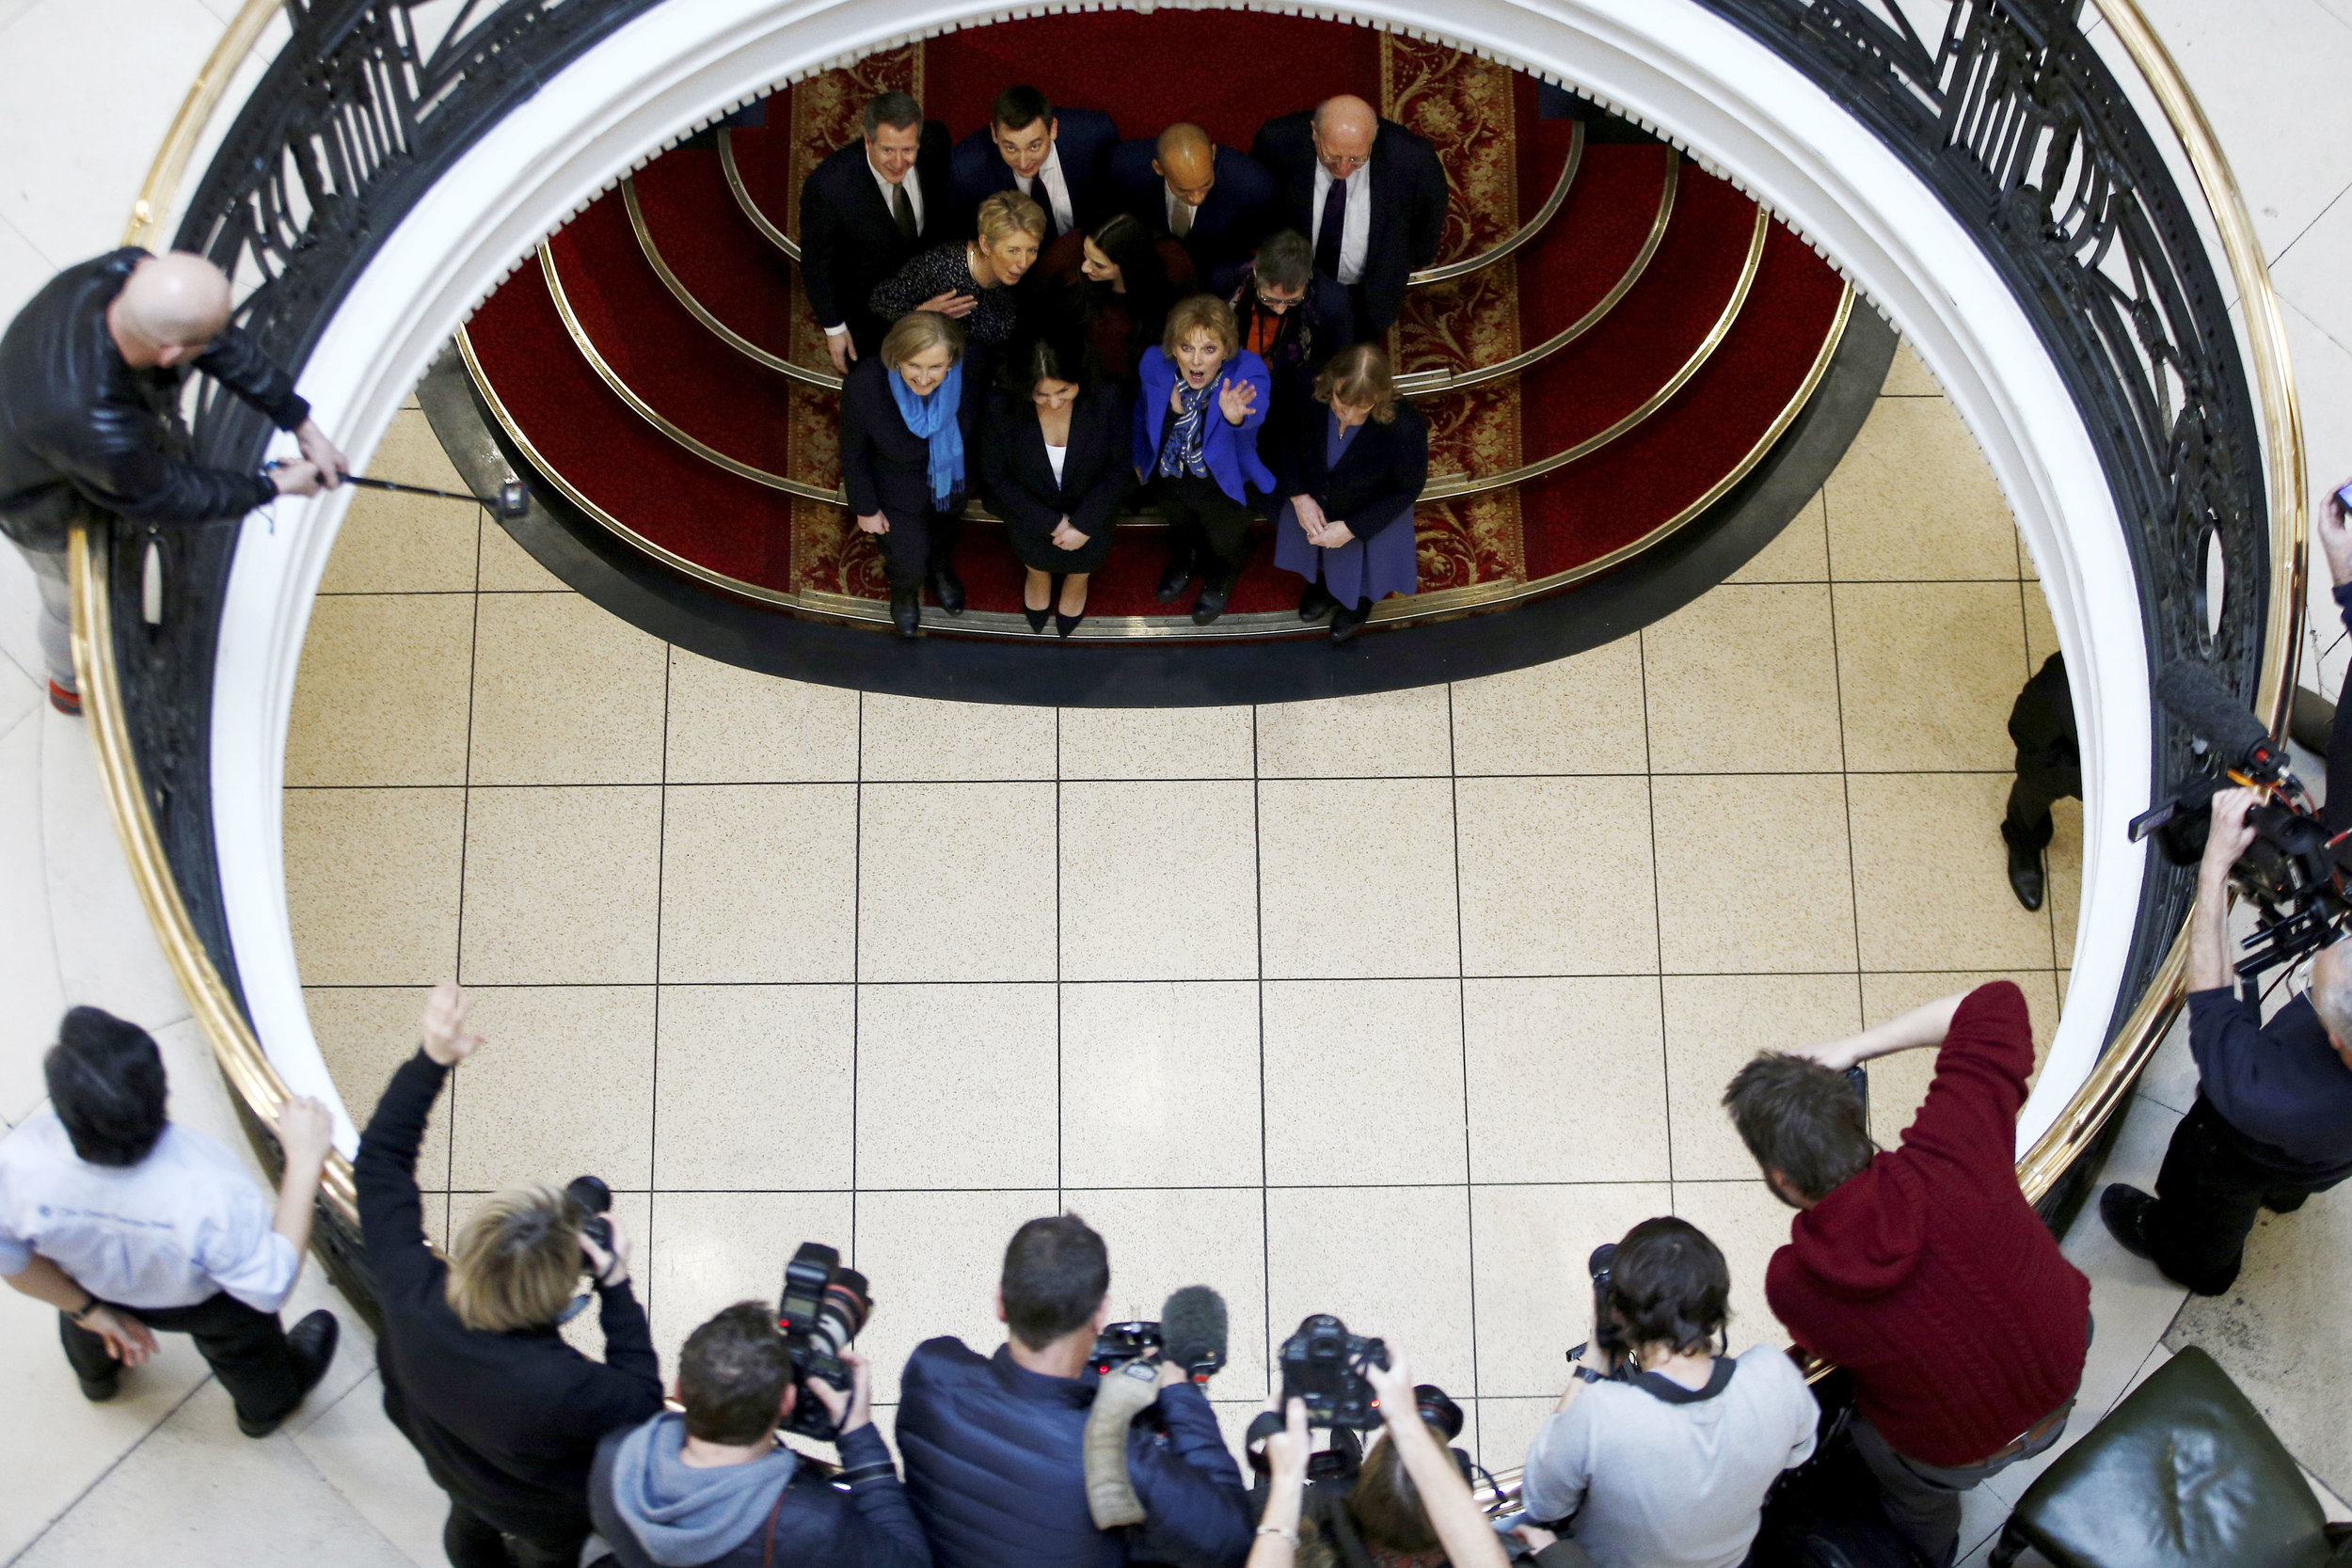  Former British Conservative Party MP Anna Soubry reacts as she poses for a photo with Sarah Wollaston, Heidi Allen, Joan Ryan, Angela Smith, Luciana Berger, Ann Coffey, Chris Leslie, Gavin Shuker, Chuka Umunna and Mike Gapes at a news conference in 